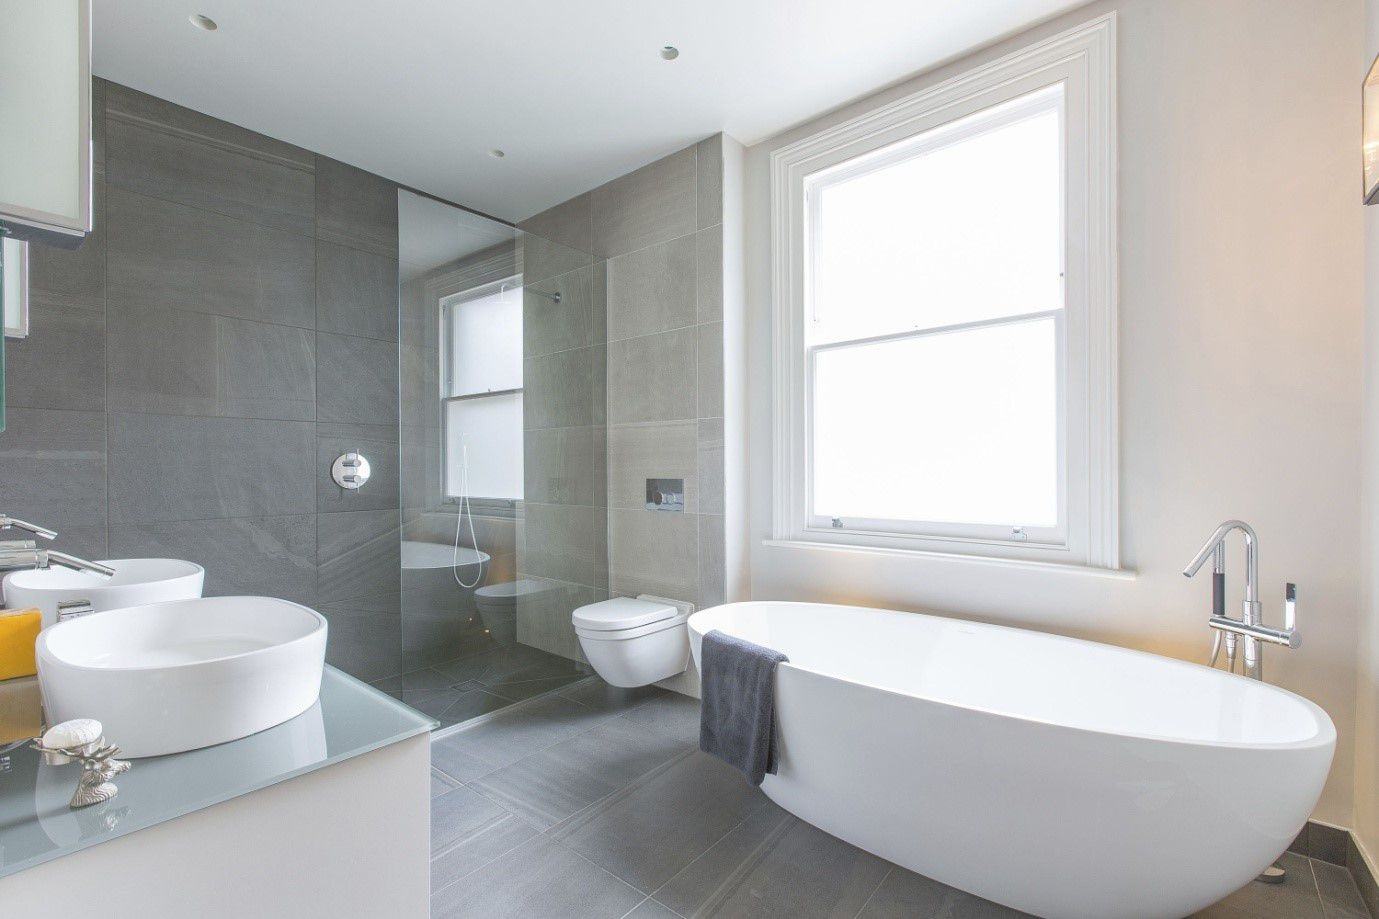 4 Things to Consider When Planning a Wet Room